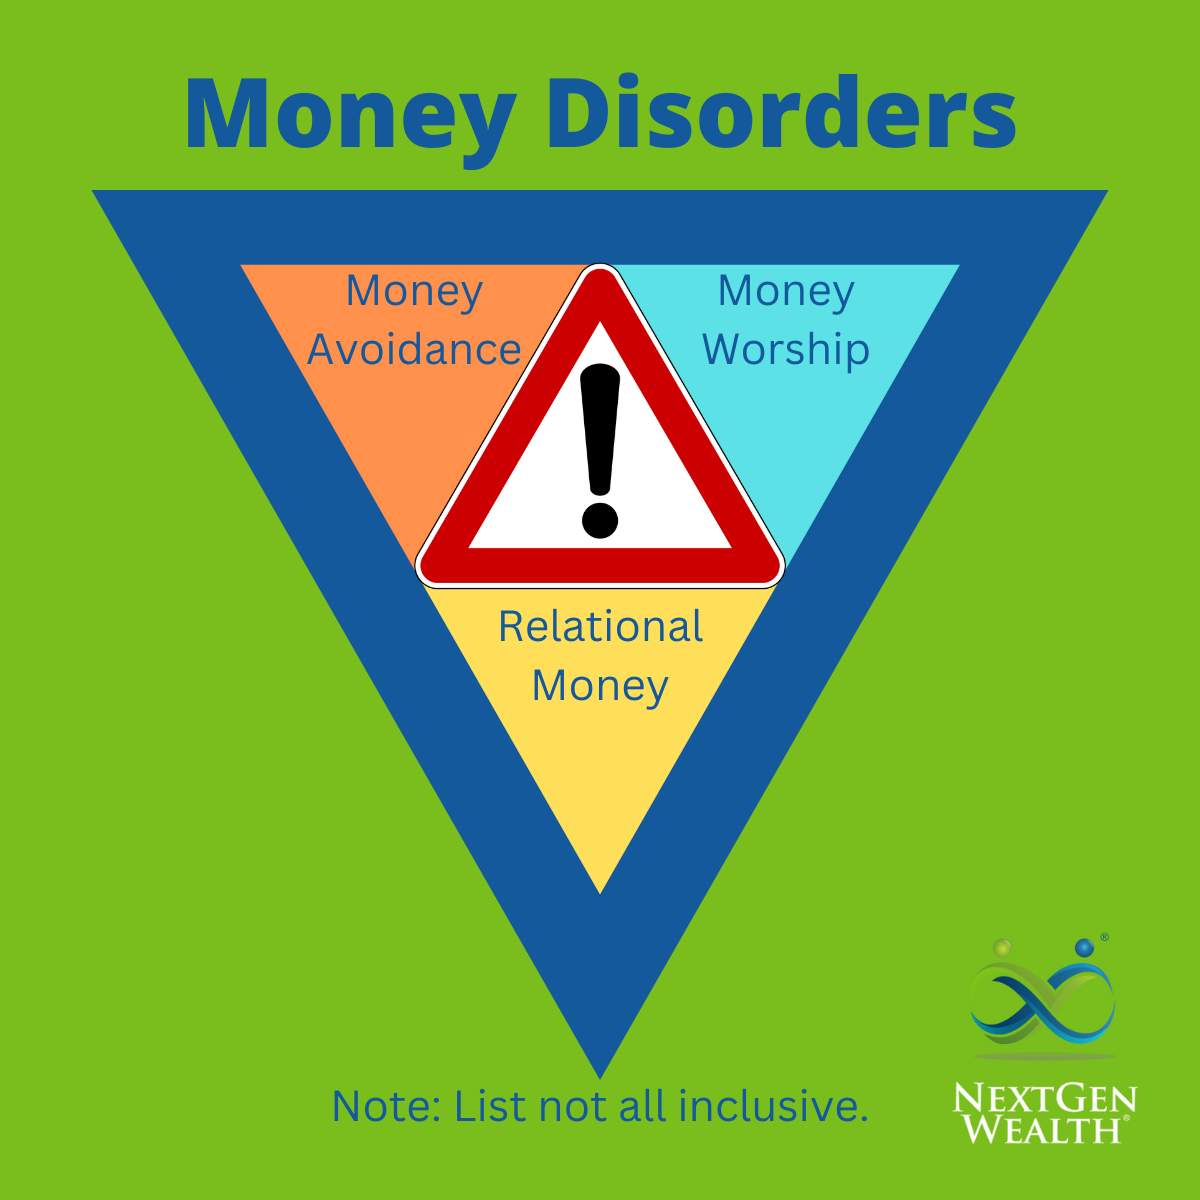 Are You Obsessed With Money Disorders